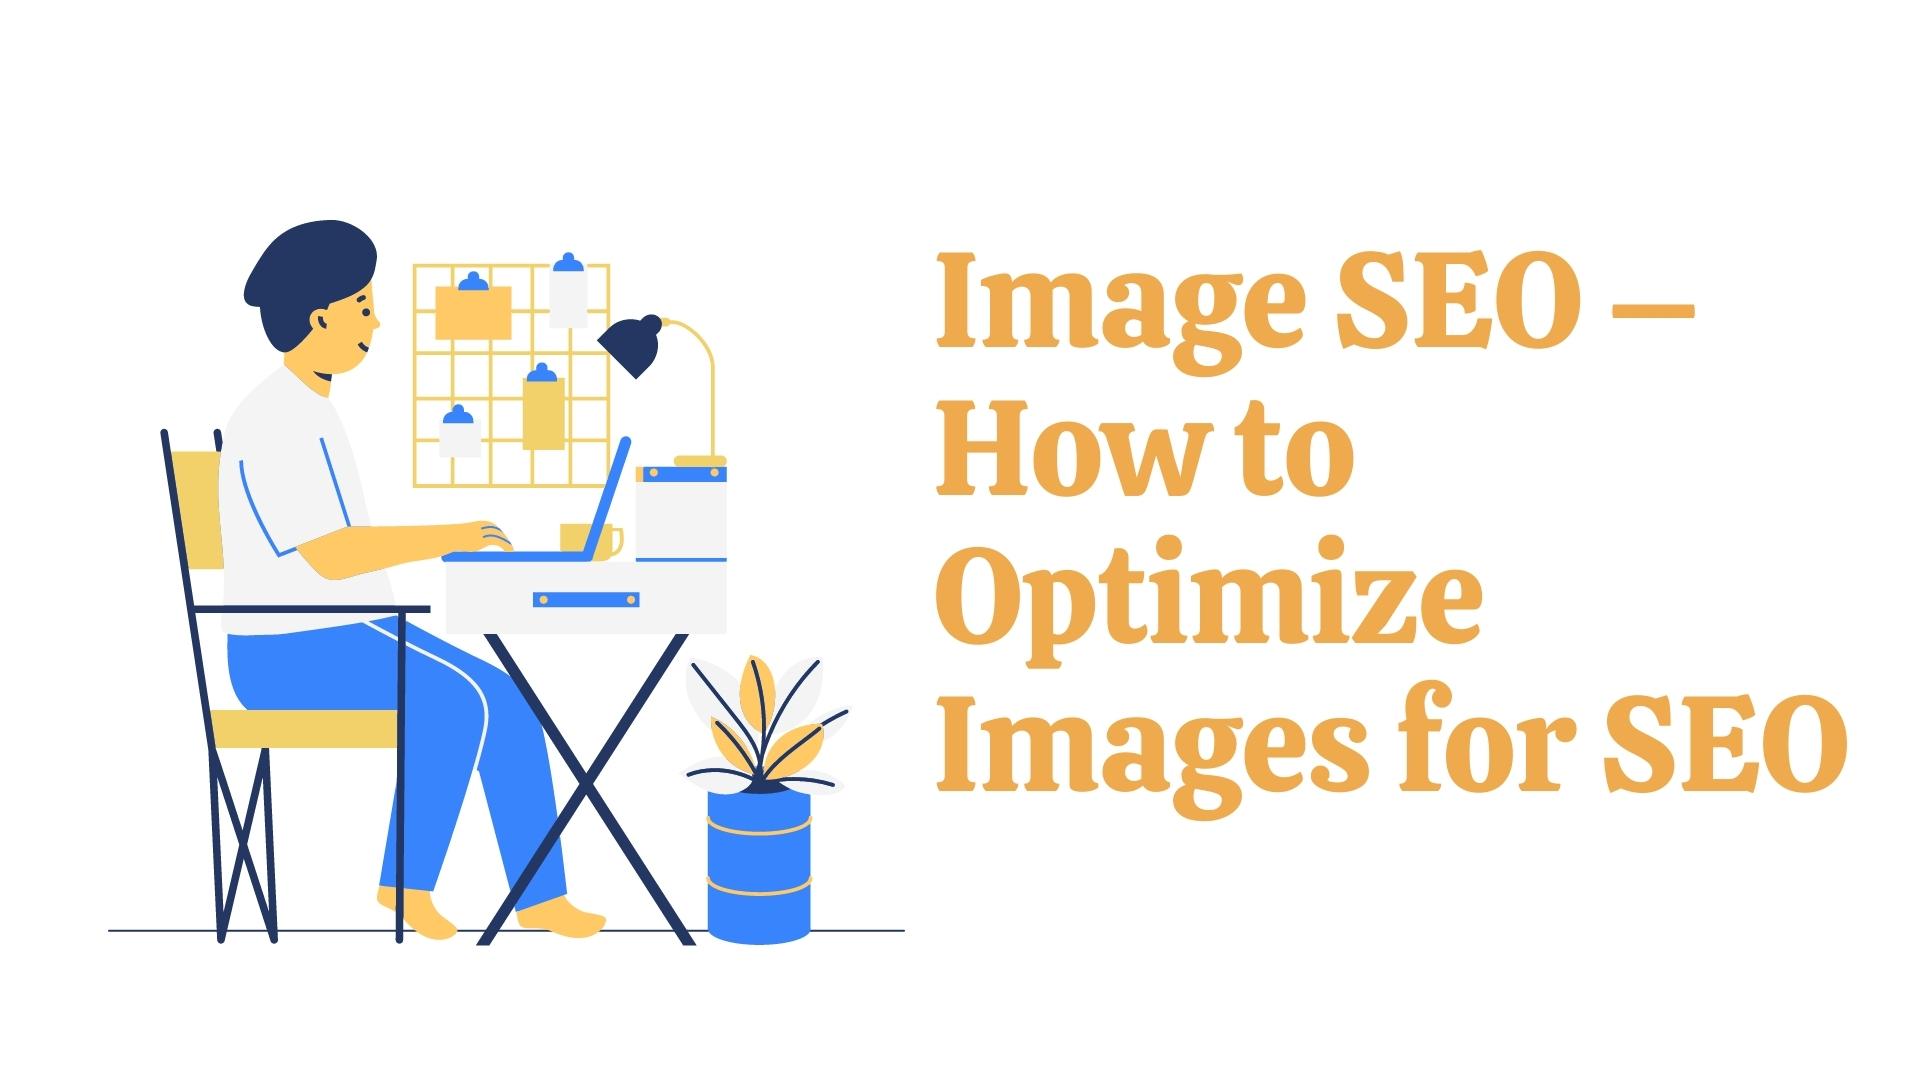 Image SEO – How to Optimize Images for SEO